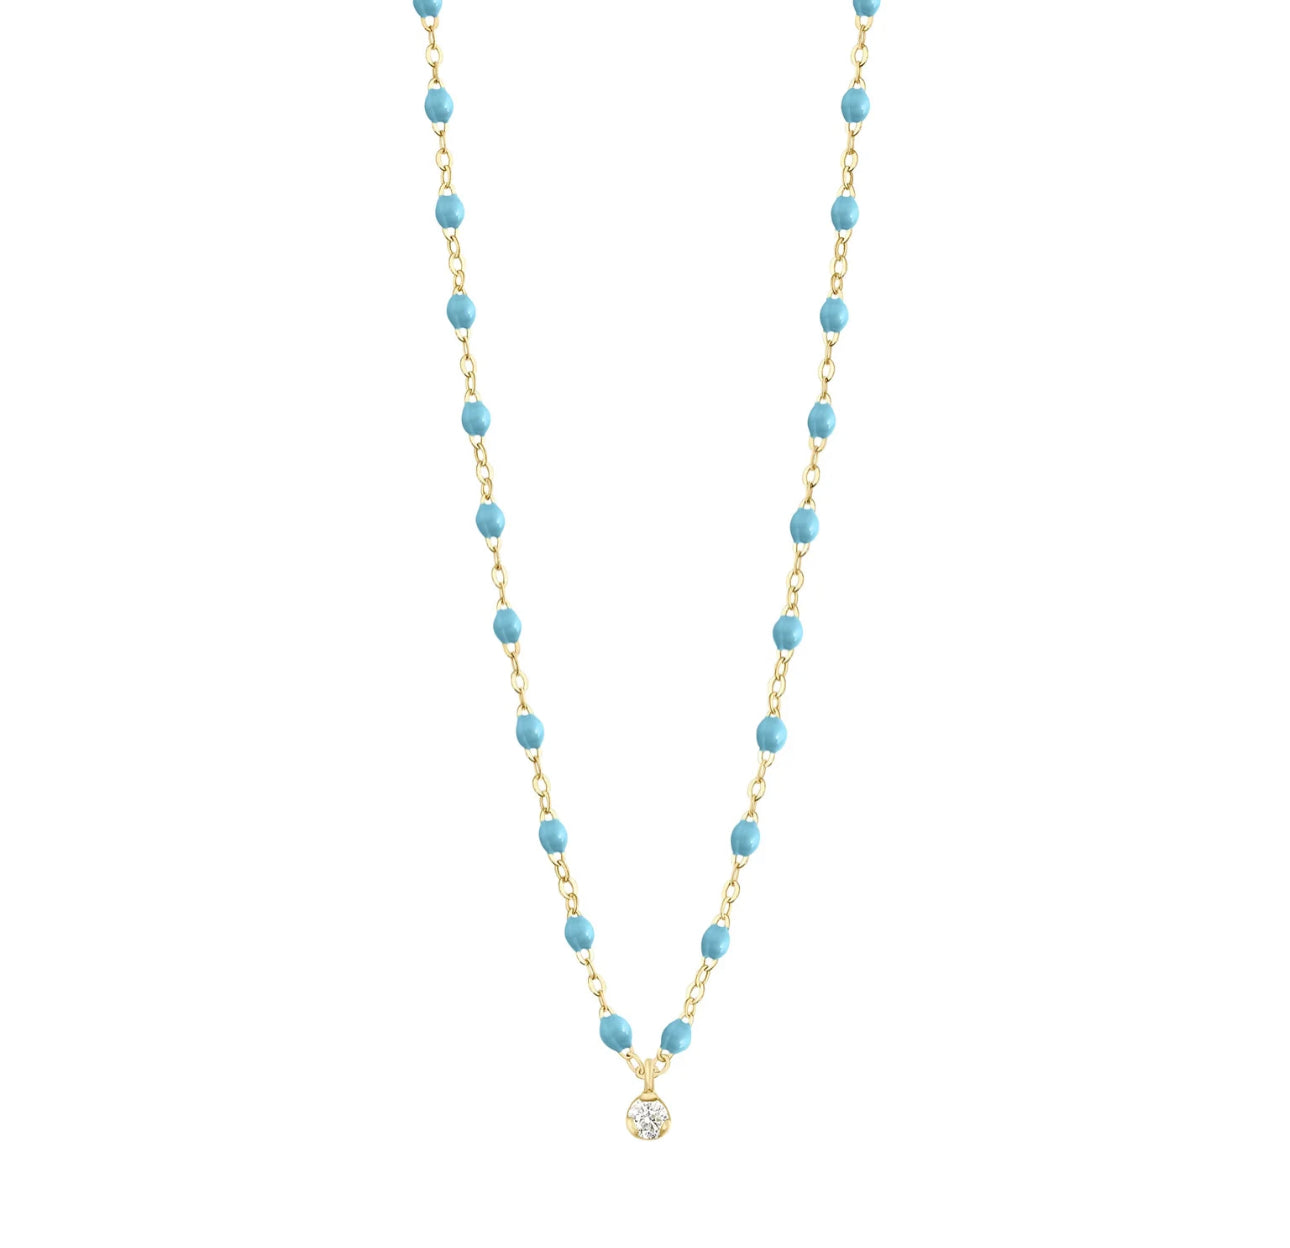 Supreme Giselle Necklace - Turquoise